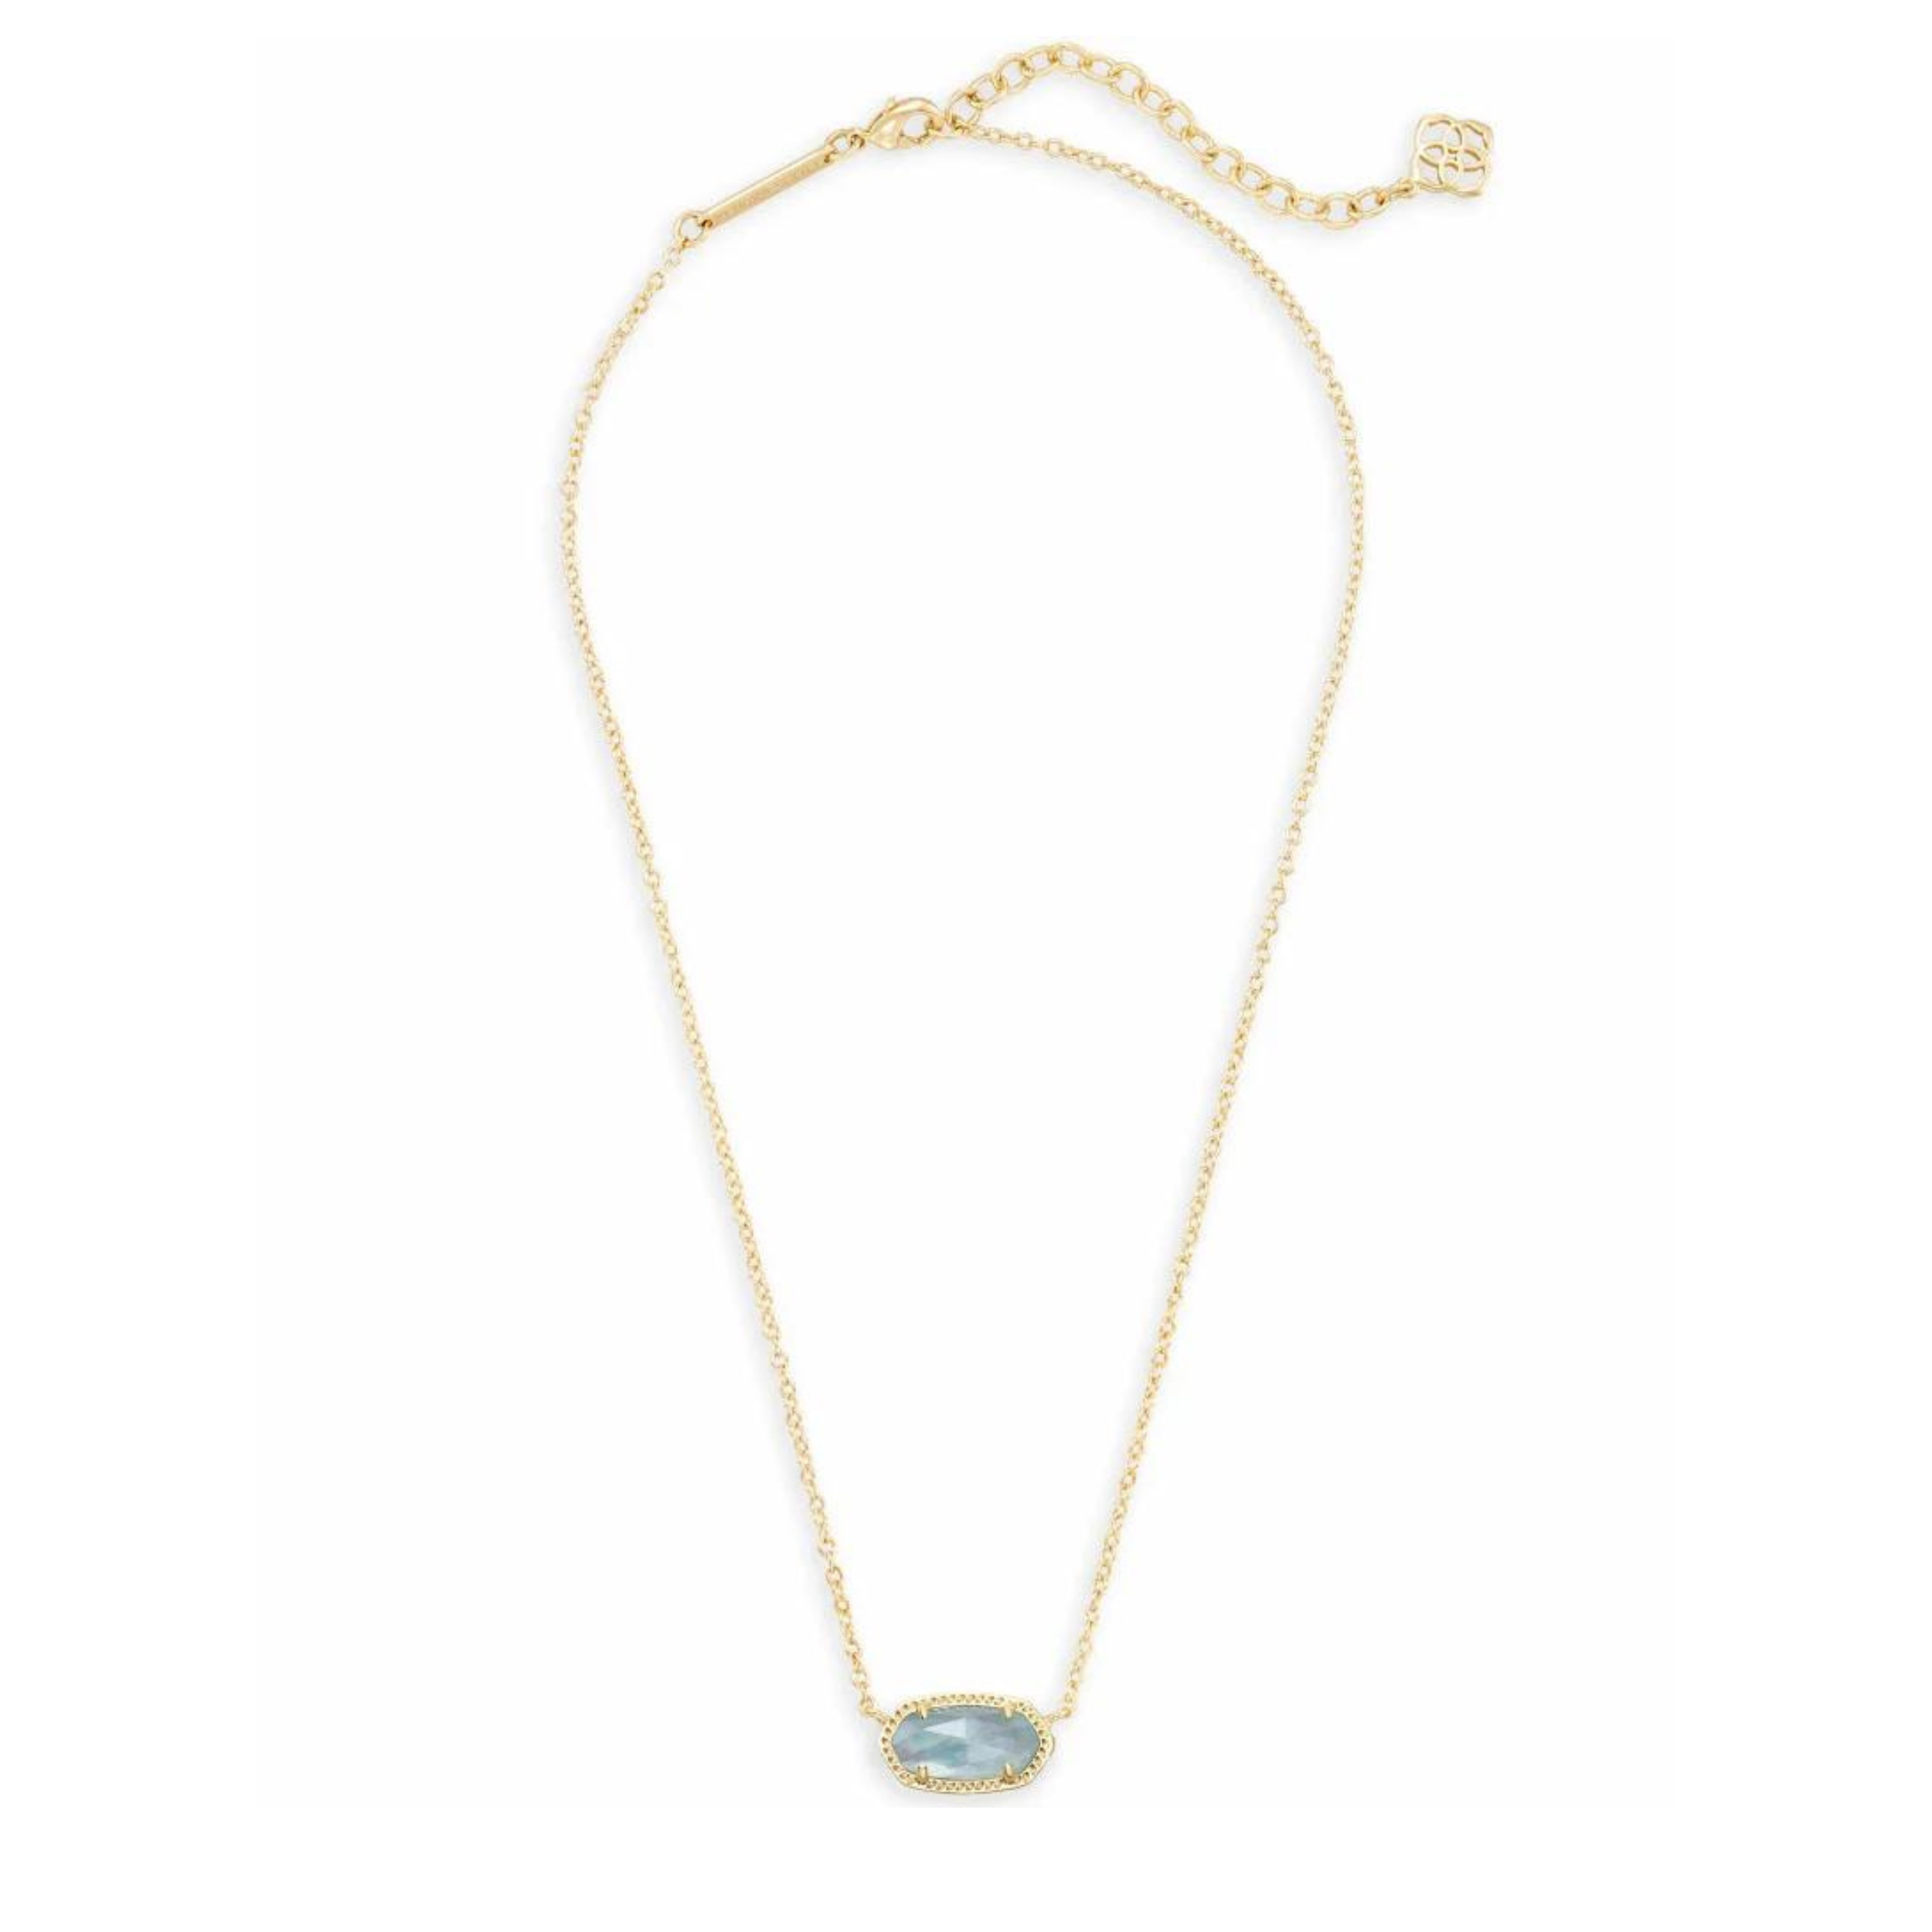 Kendra Scott |  Elisa Pendant Necklace in Light Blue Illusion - Giddy Up Glamour Boutique